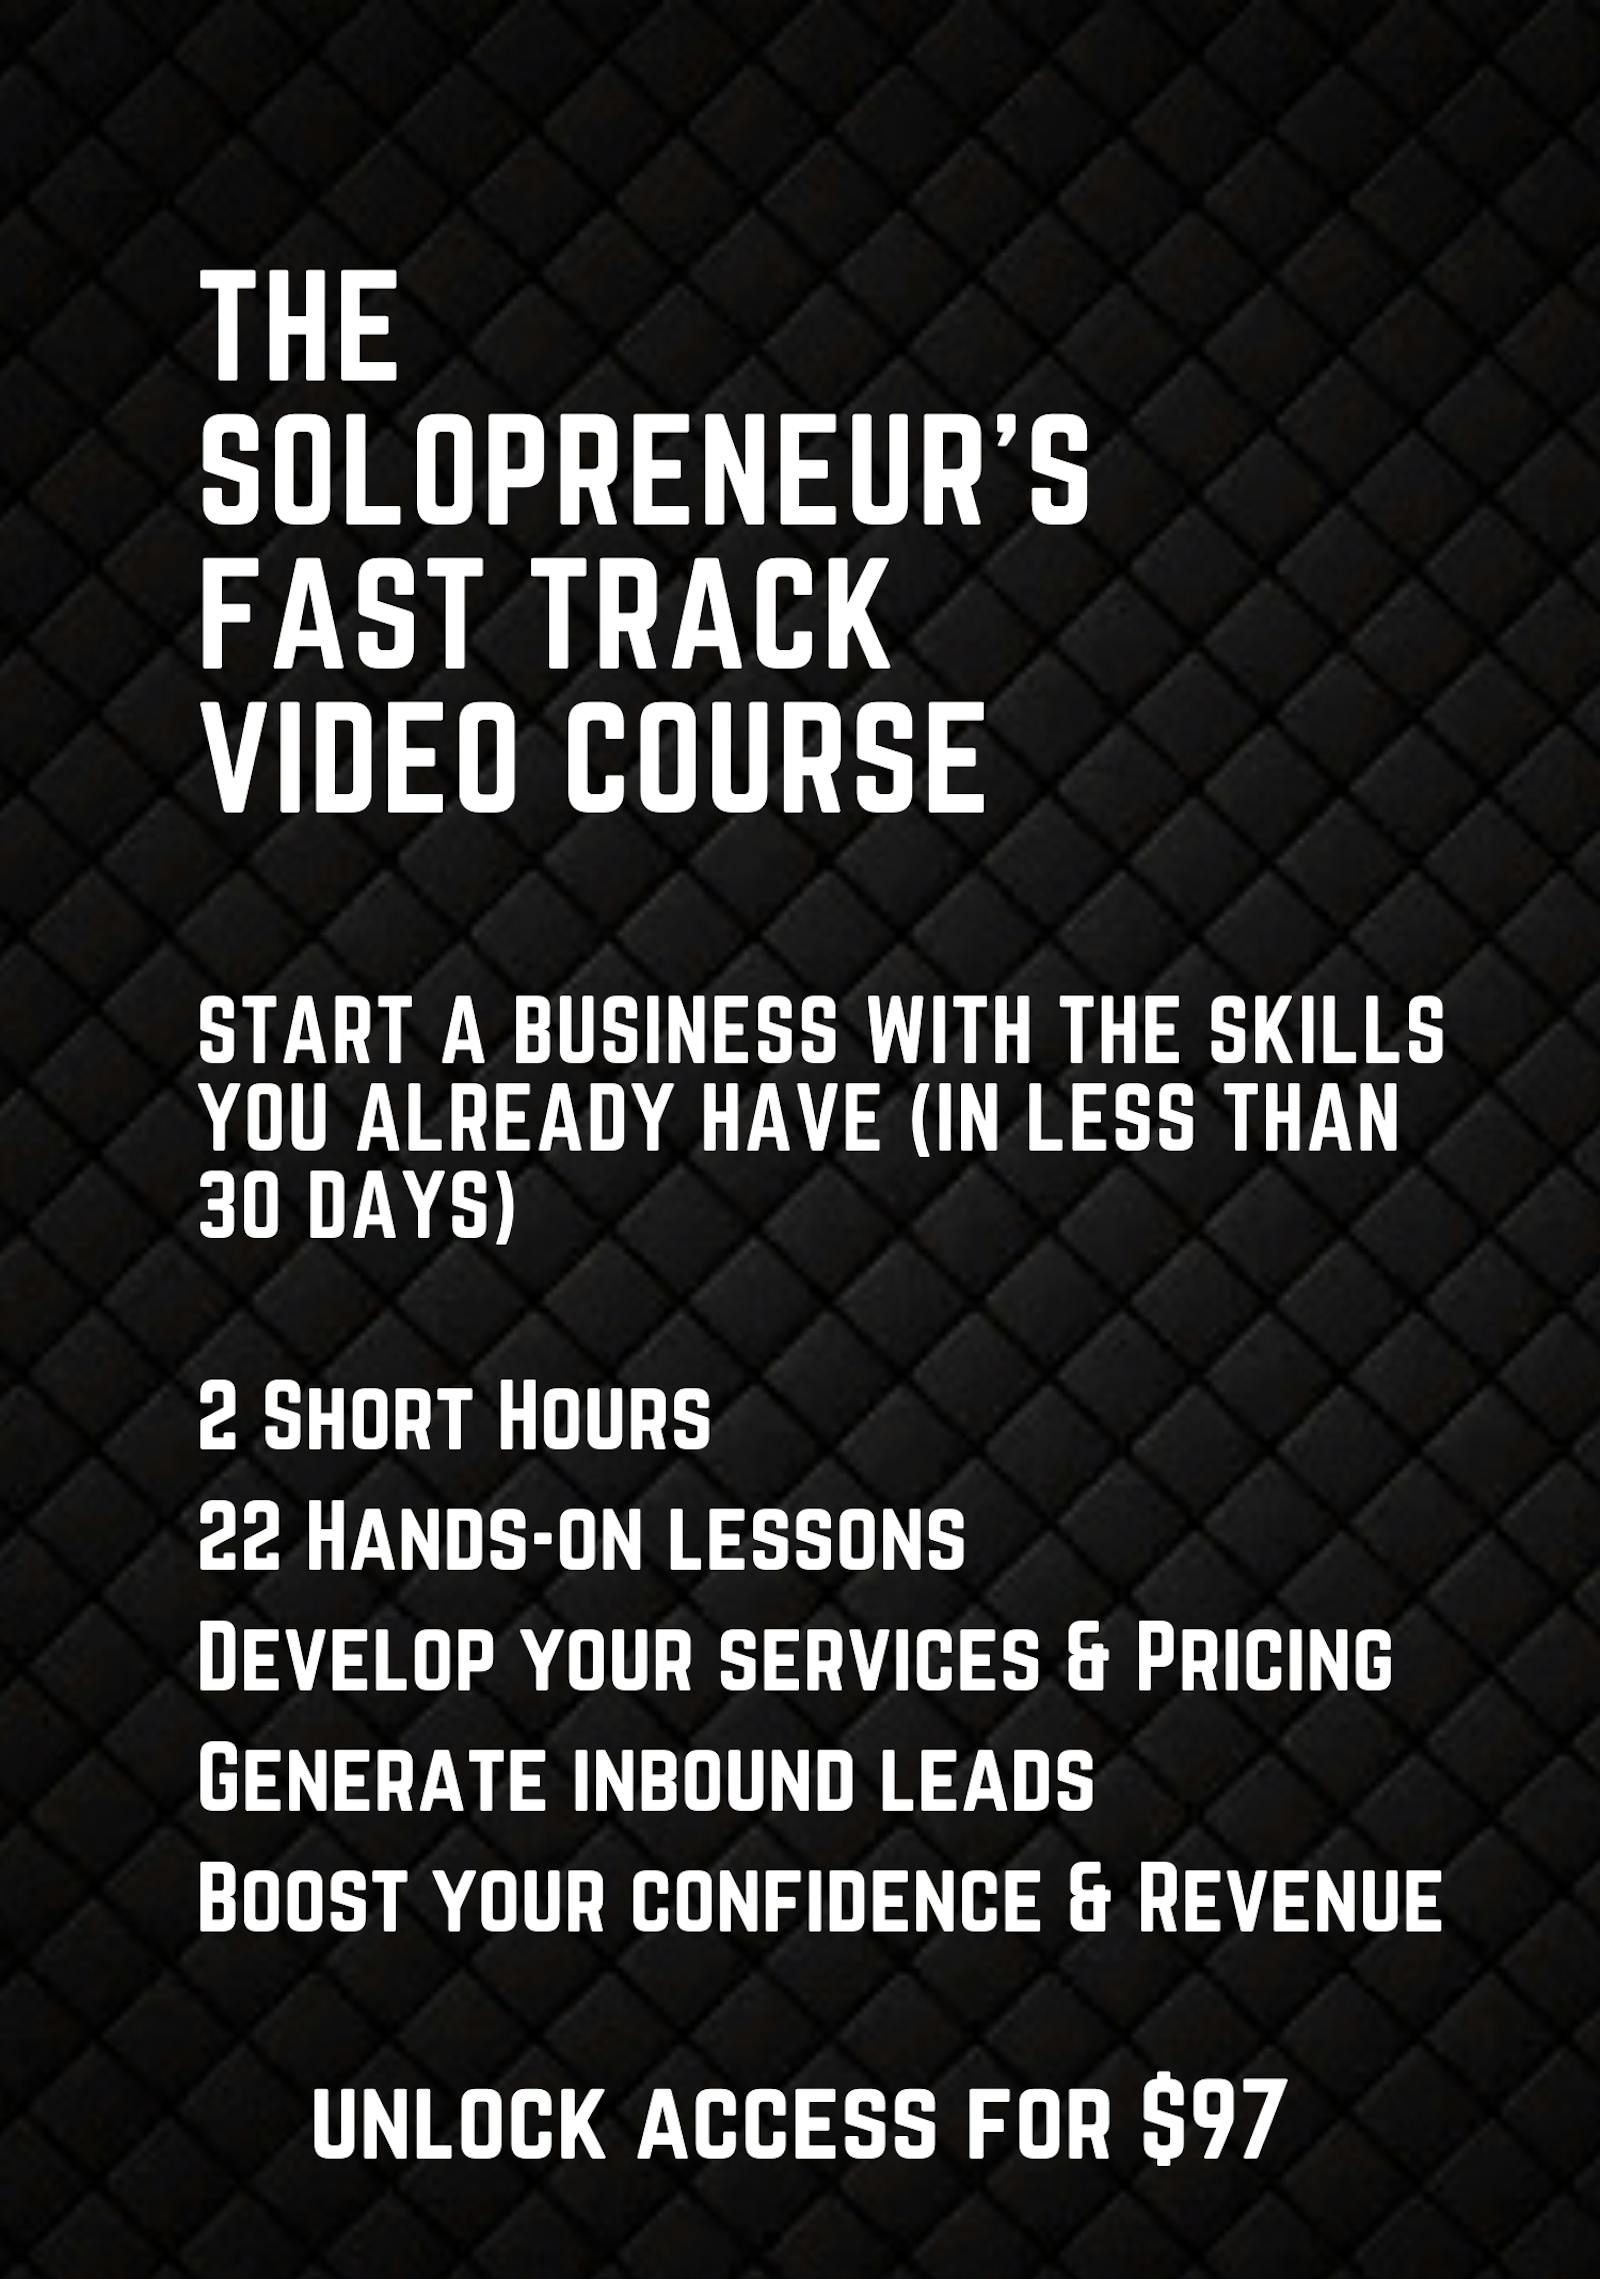 Start a business with the skills you already have (and enjoy) in less than 30 days.